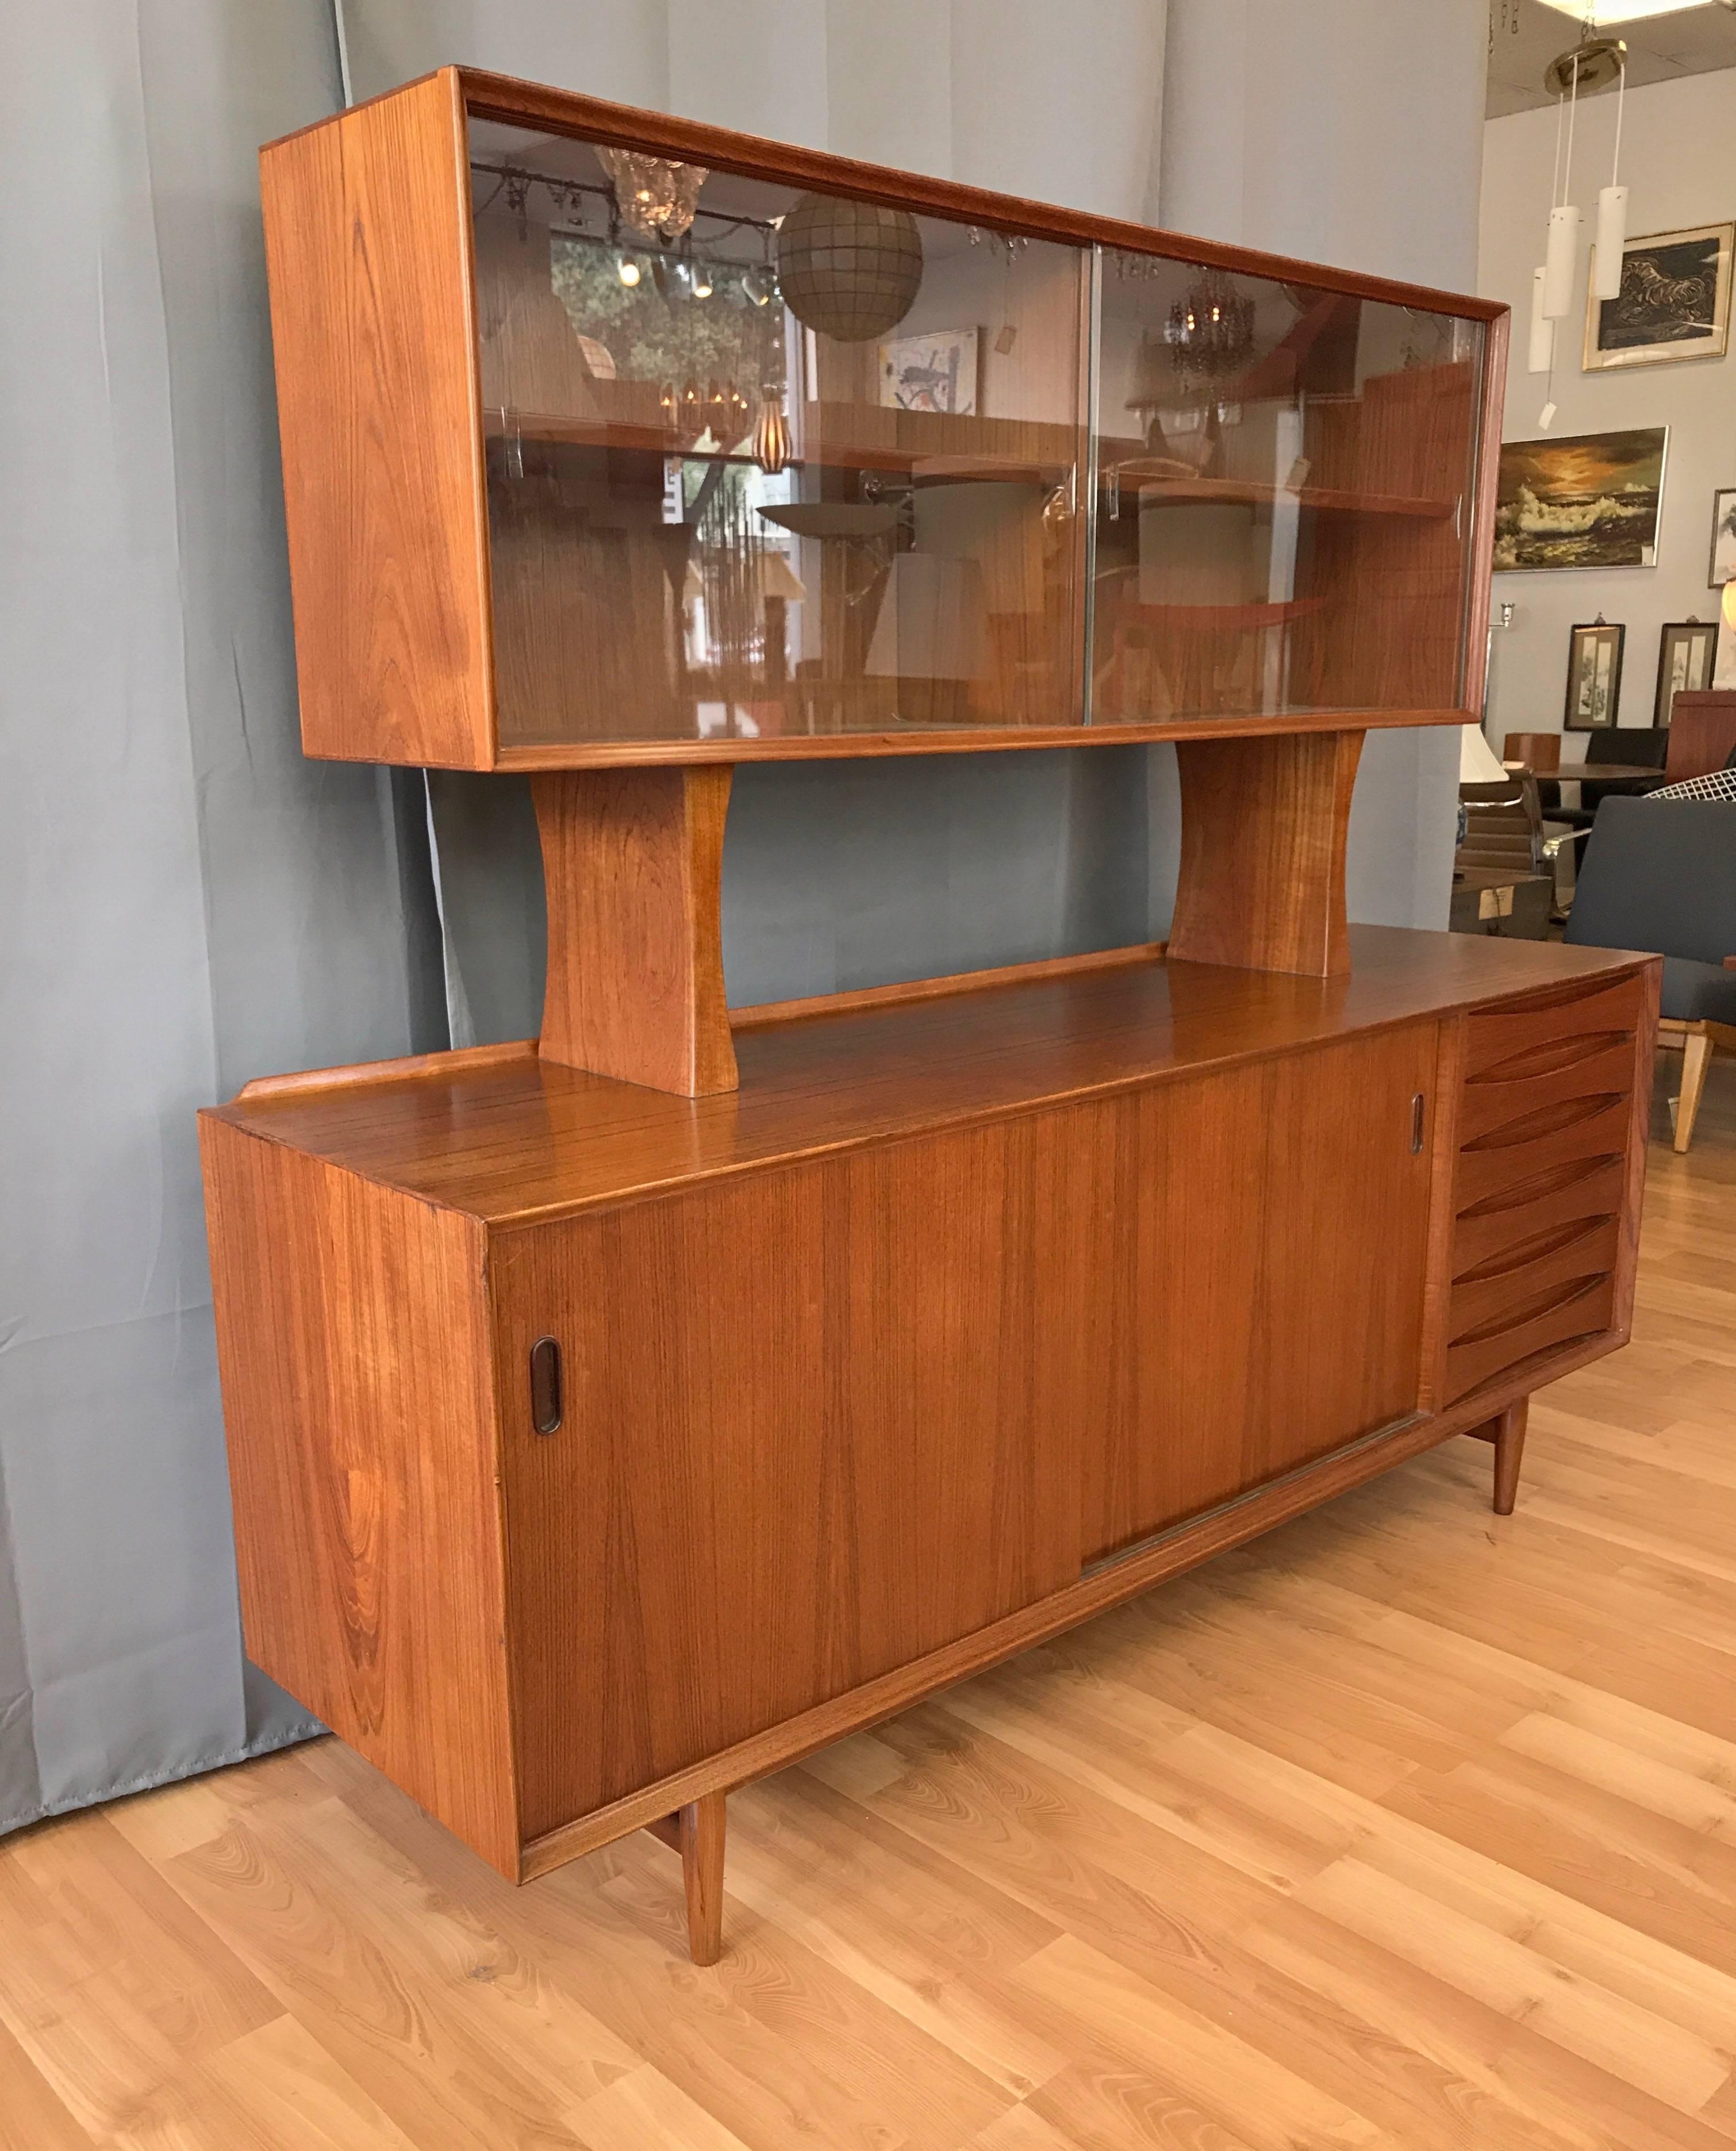 A fantastic teak OS-29 teak sideboard or credenza with rare freestanding floating bookcase hutch designed by Arne Vodder and produced by Povl Dinesen. Offered as a set or as two separate pieces.

Originally produced by Sibast Møbler, the OS-29